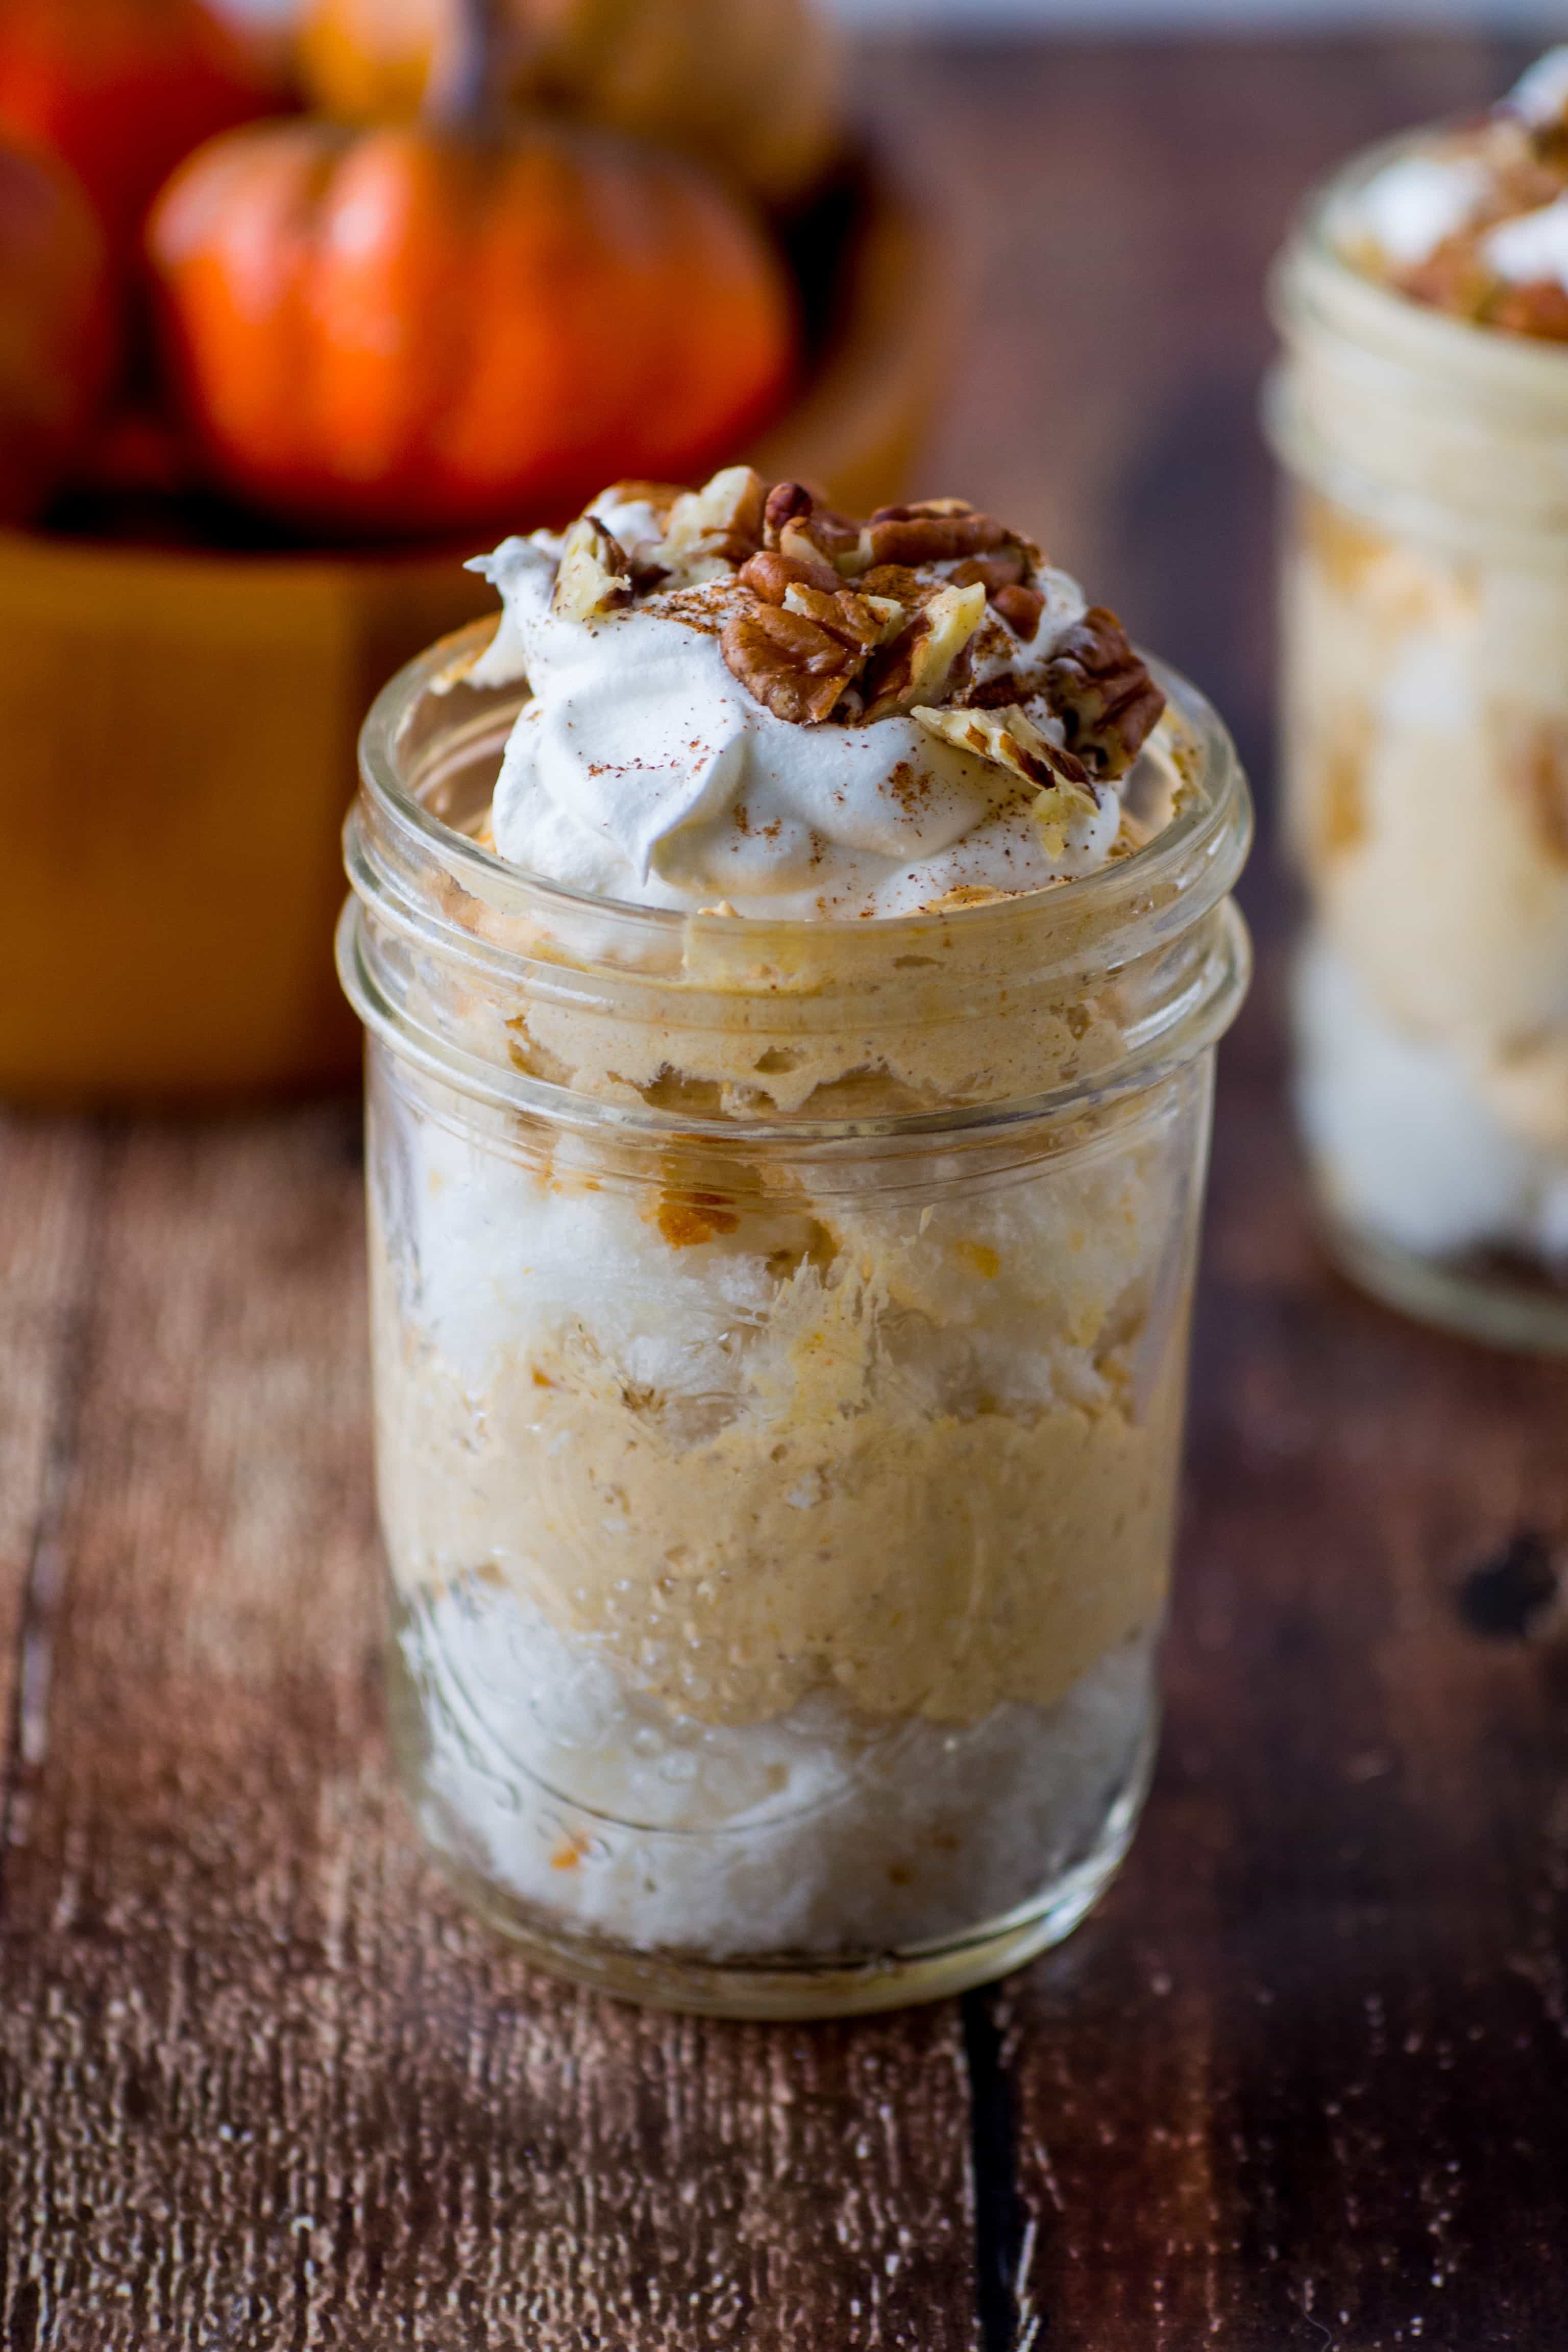 This Pumpkin Cheesecake Trifle is made by layering store bought angel food cake in a mason jar with pumpkin cheesecake filling and topping it off with whipped topping and pecans. The pumpkin trifle is a seasonal dessert that is both elegant and easy, nice enough for Thanksgiving or Christmas, yet easy enough to make for a family dinner. #pumpkin #trifle #thanksgiving #dessert